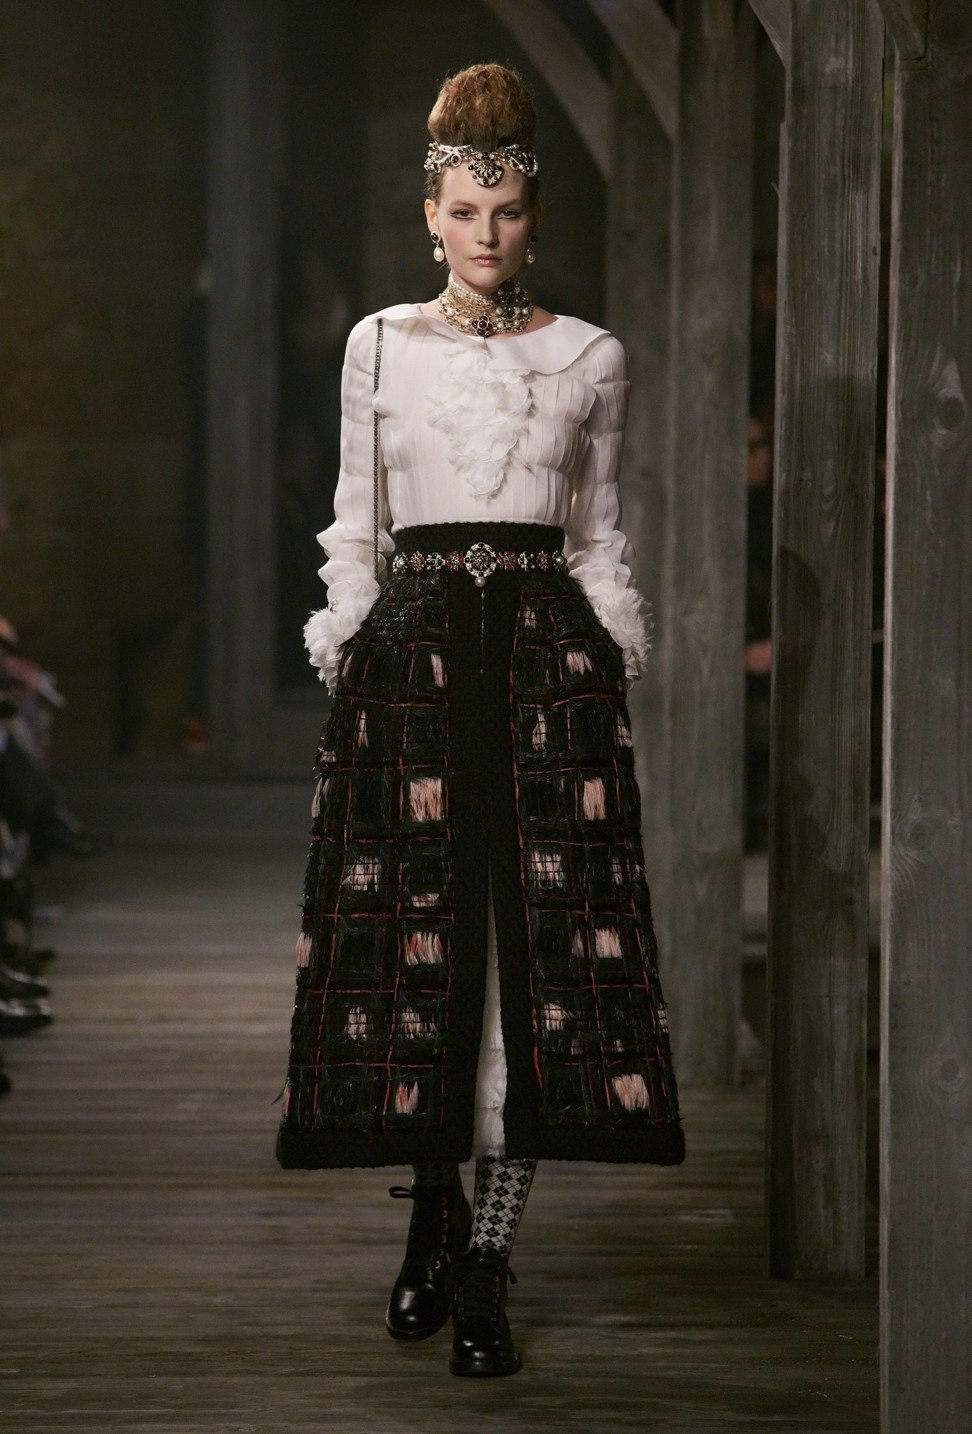 A model on the catwalk during Chanel's Metiers d'Art Paris-Édimbourg show 2013 at Linlithgow Palace in Scotland.